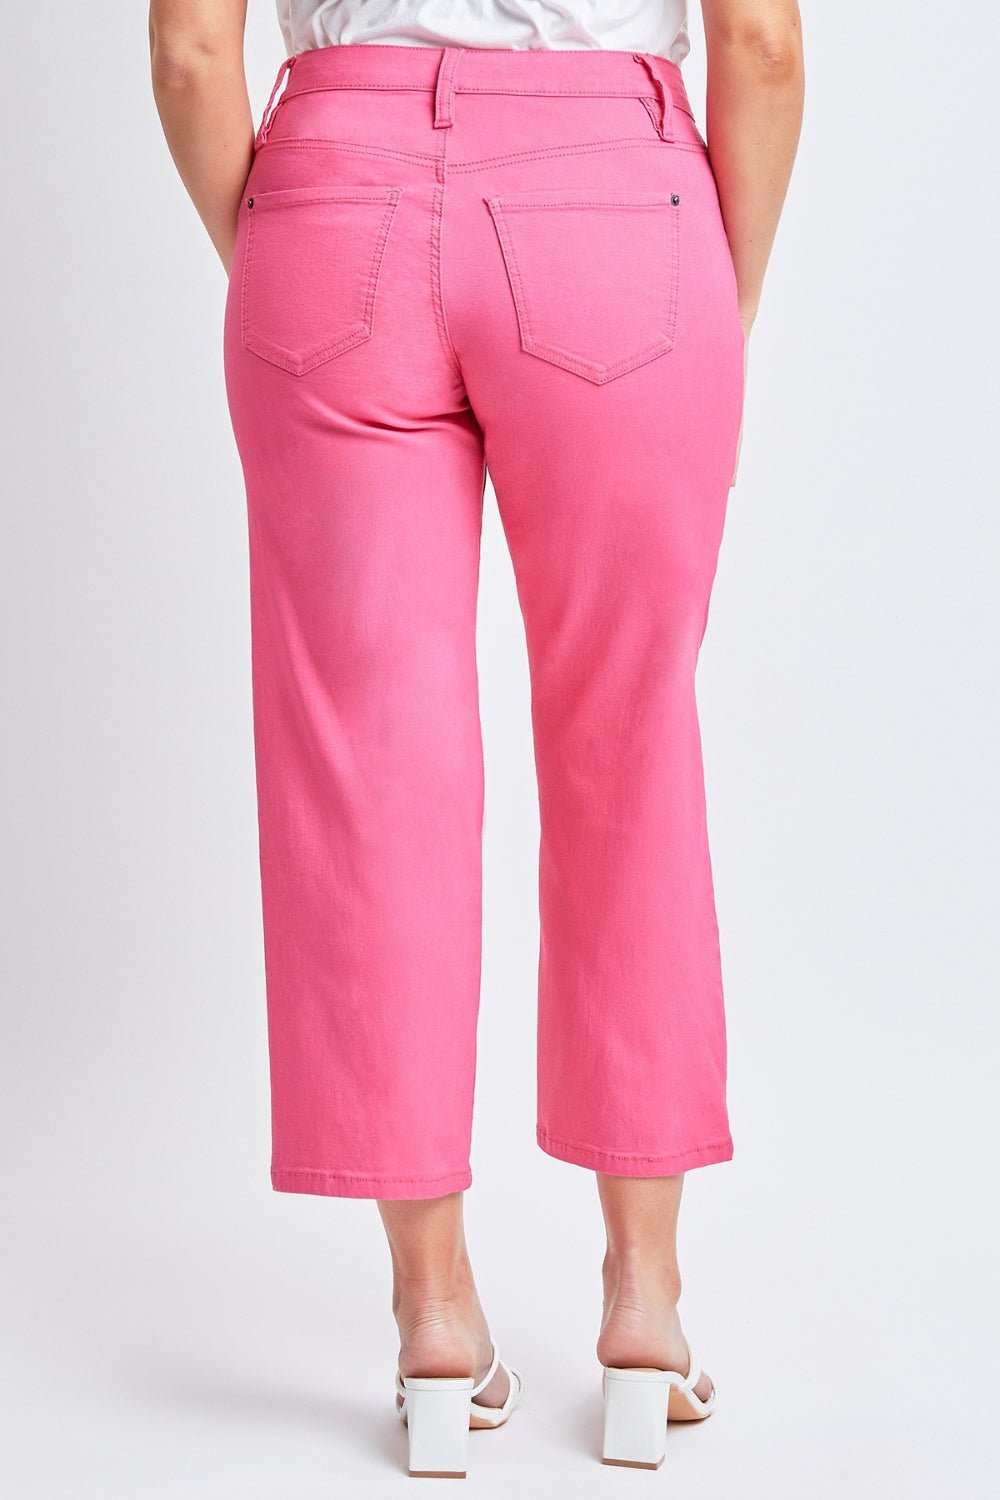 Mid-Rise Hyperstretch Cropped Jeans in Fiery CoralJeansYMI Jeanswear